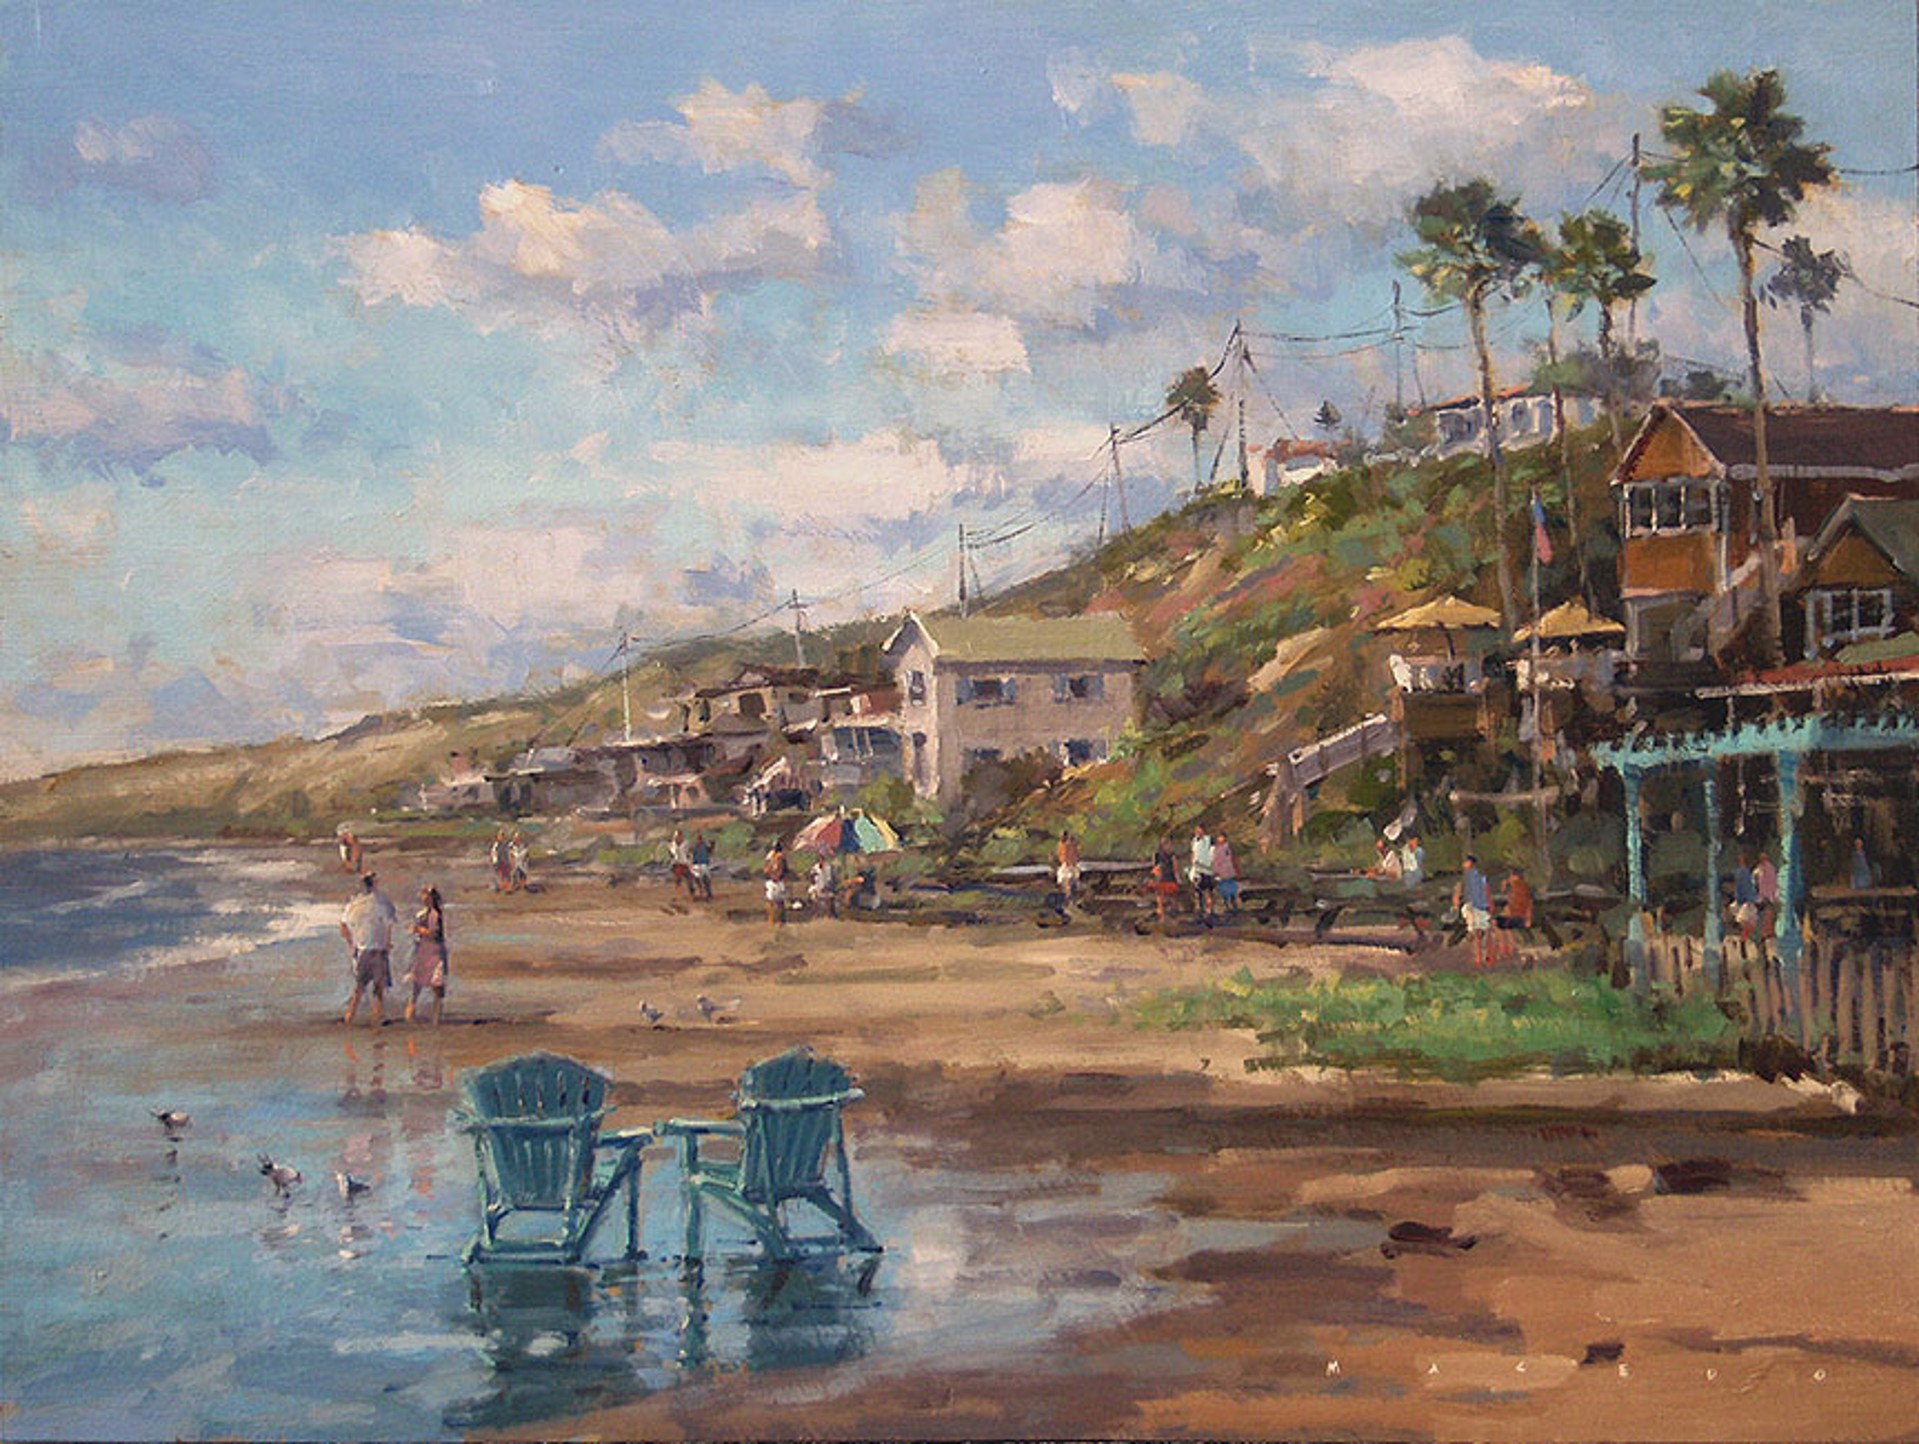 Crystal Cove Date - SOLD by Commission Possibilities / Previously Sold ZX